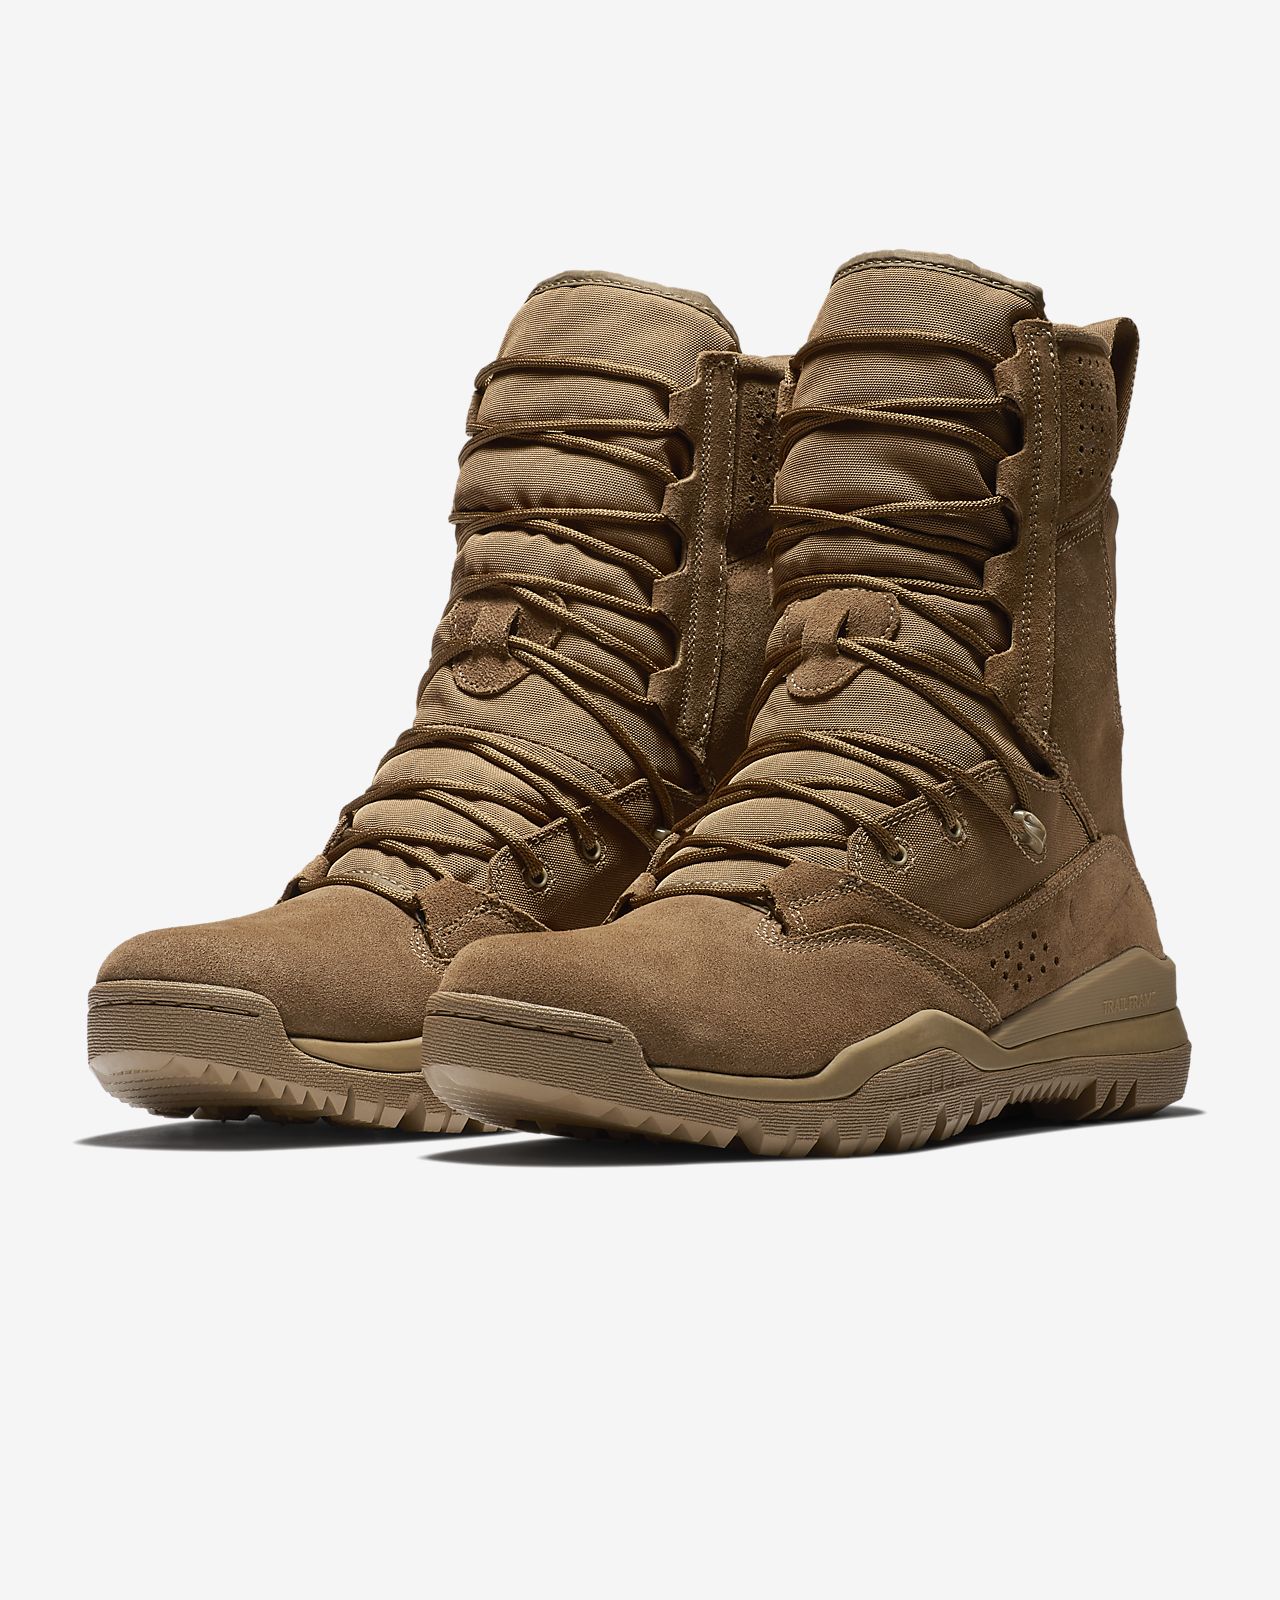 nike combat boots coyote brown